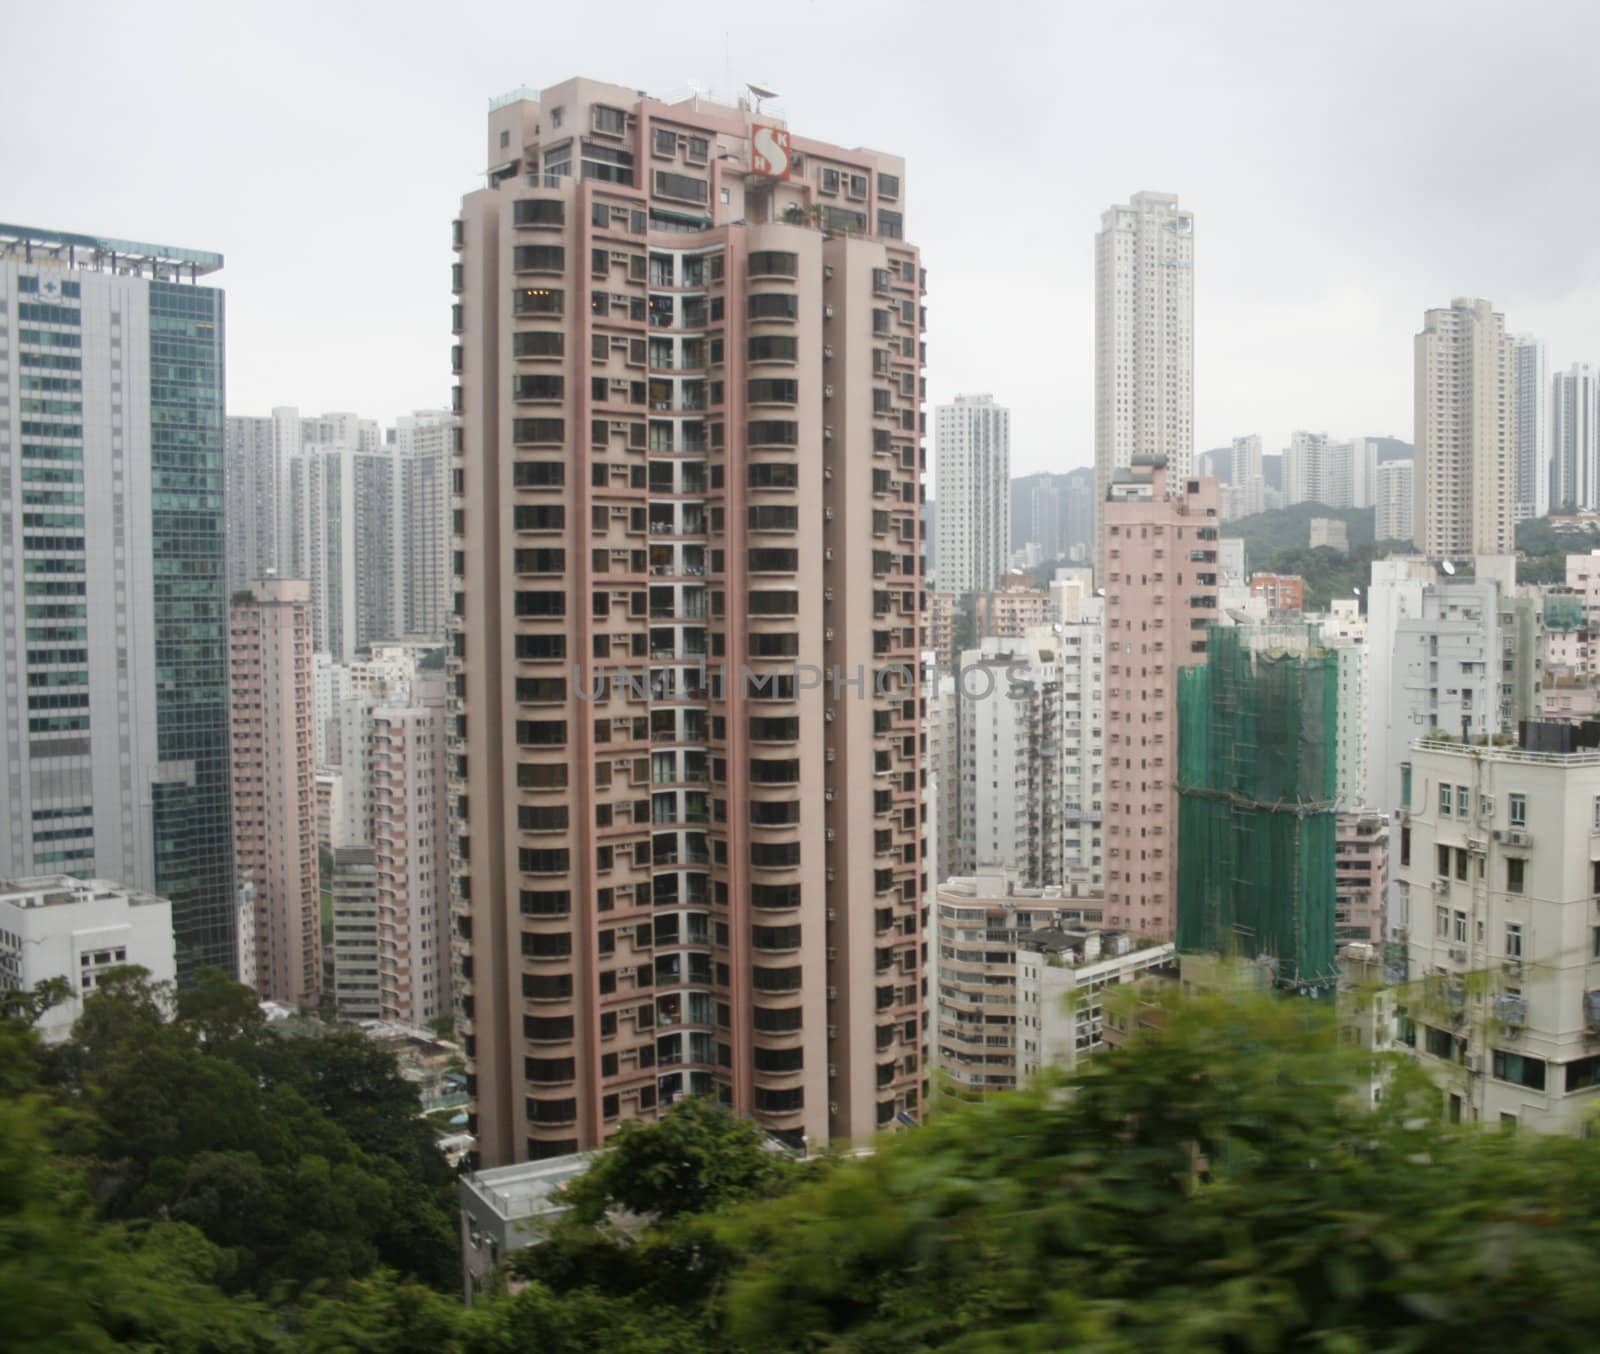 High-rise on the way to the Peak, Hong Kong, China by koep